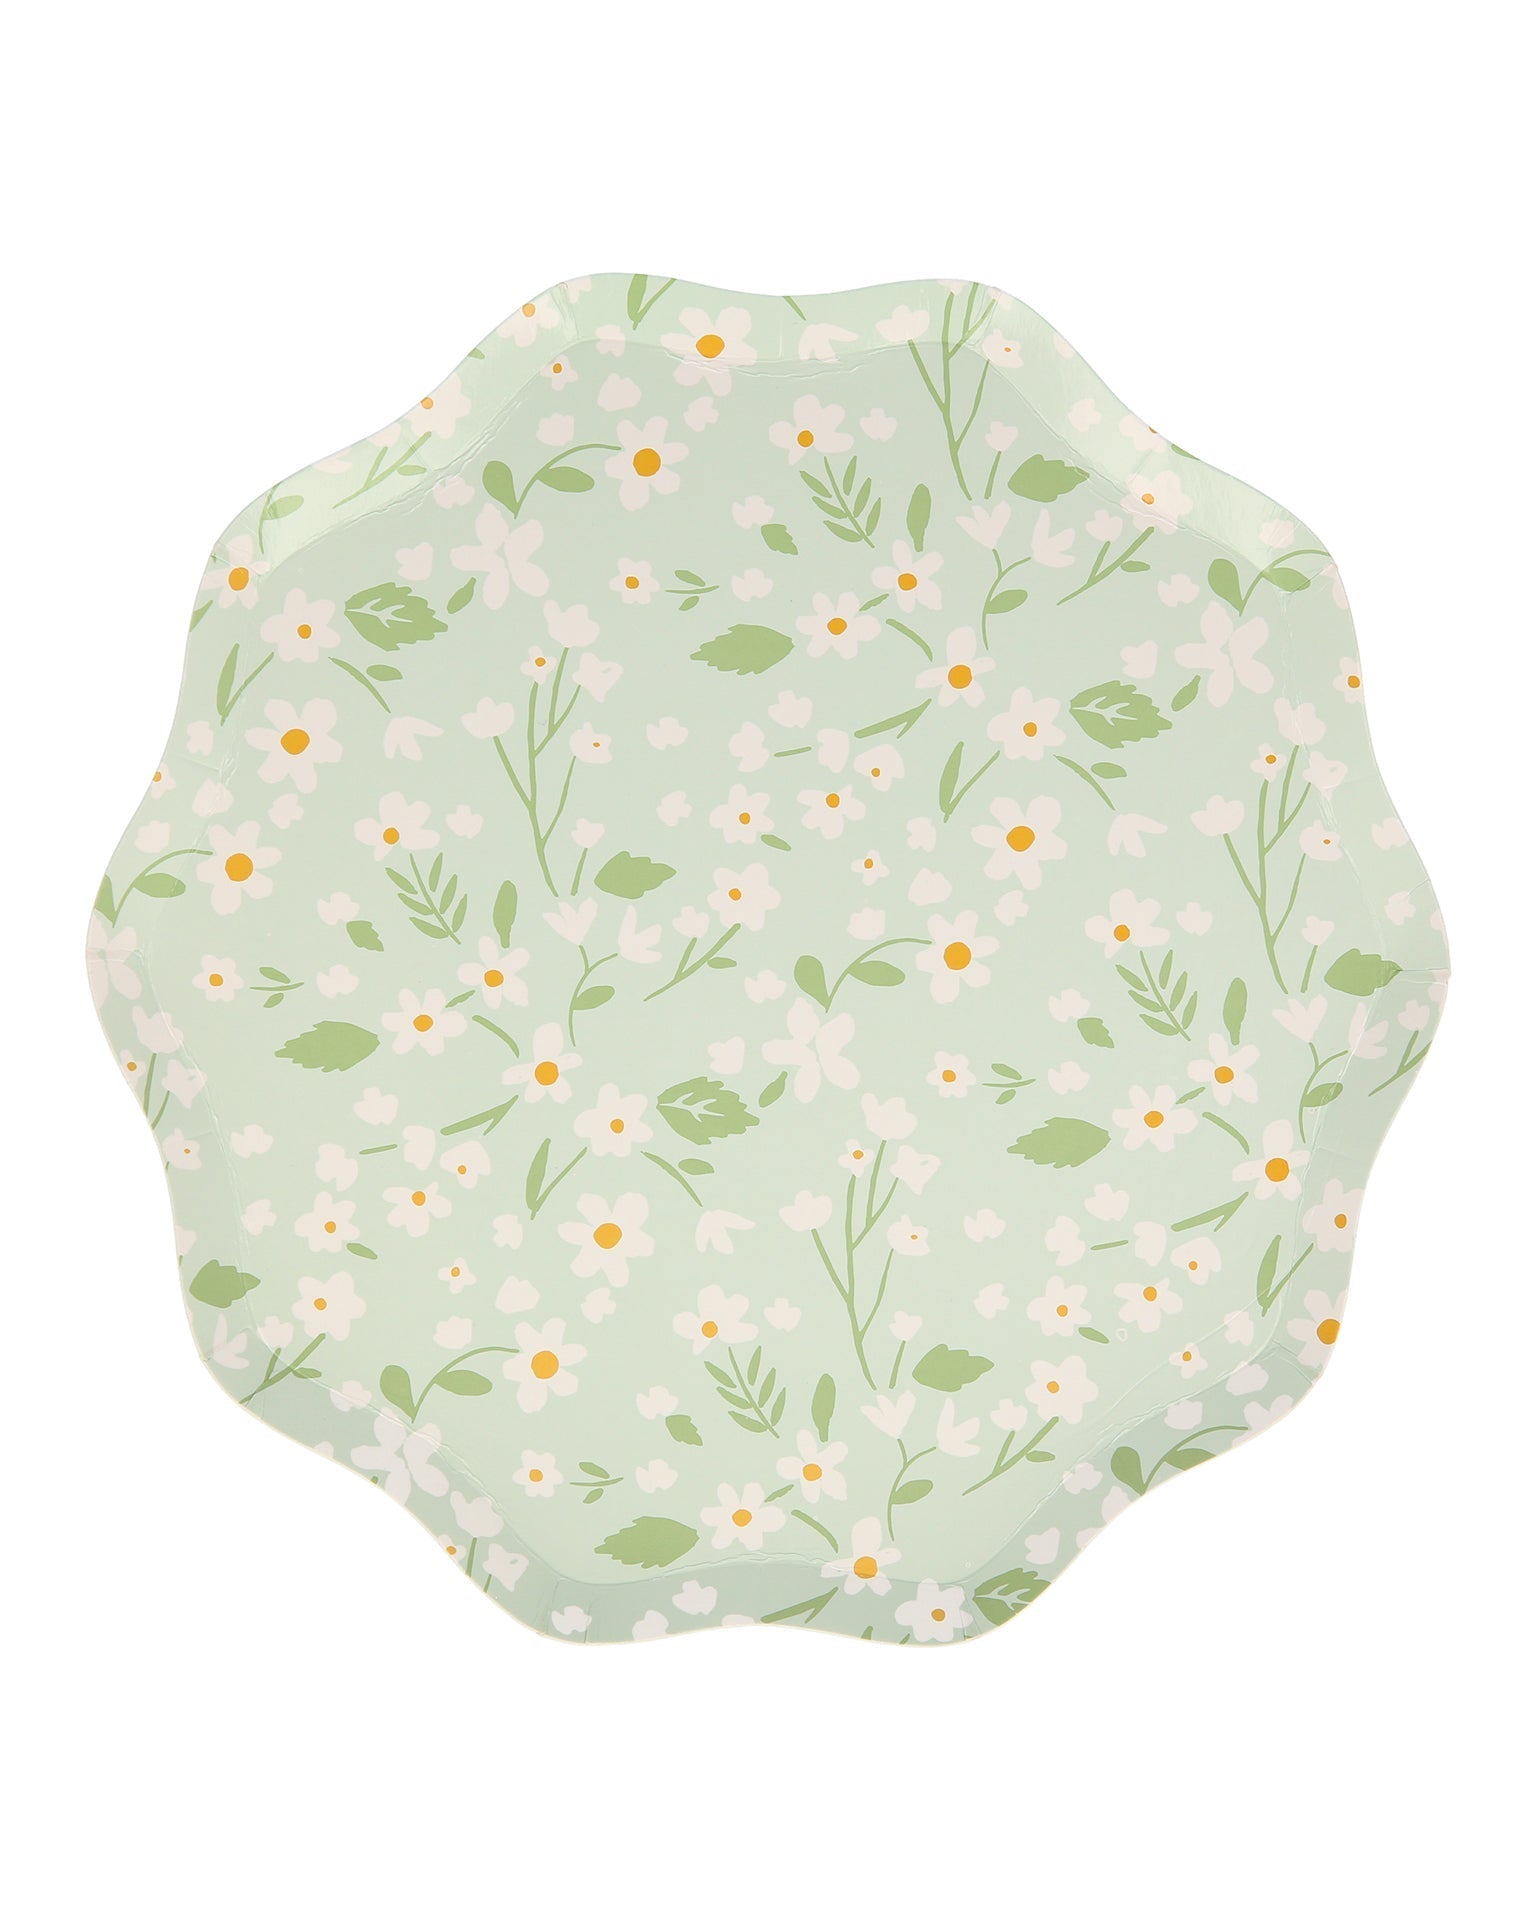 Little meri meri paper + party ditsy floral small plates